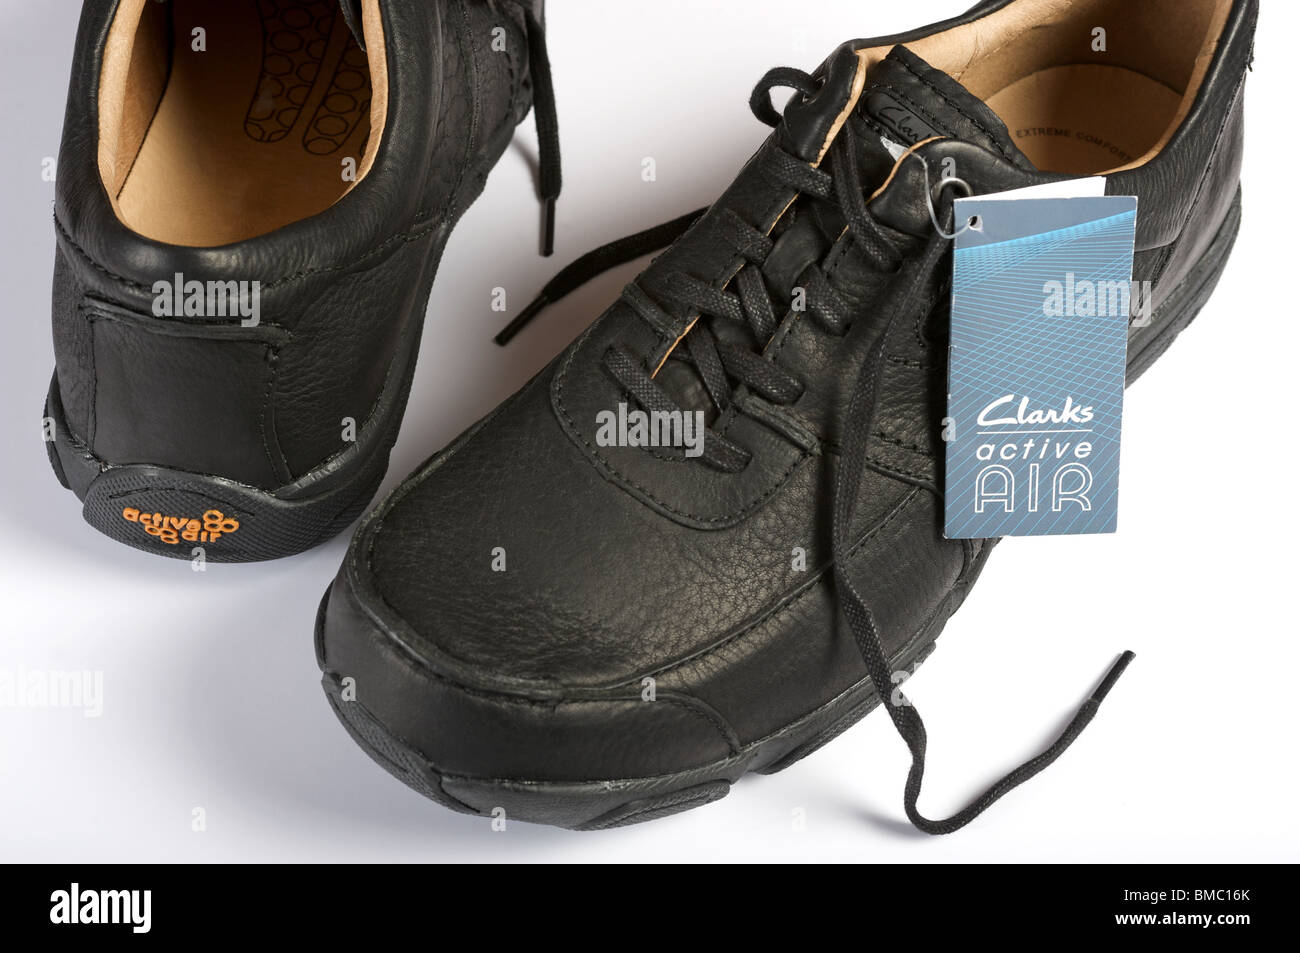 clarks active air shoes